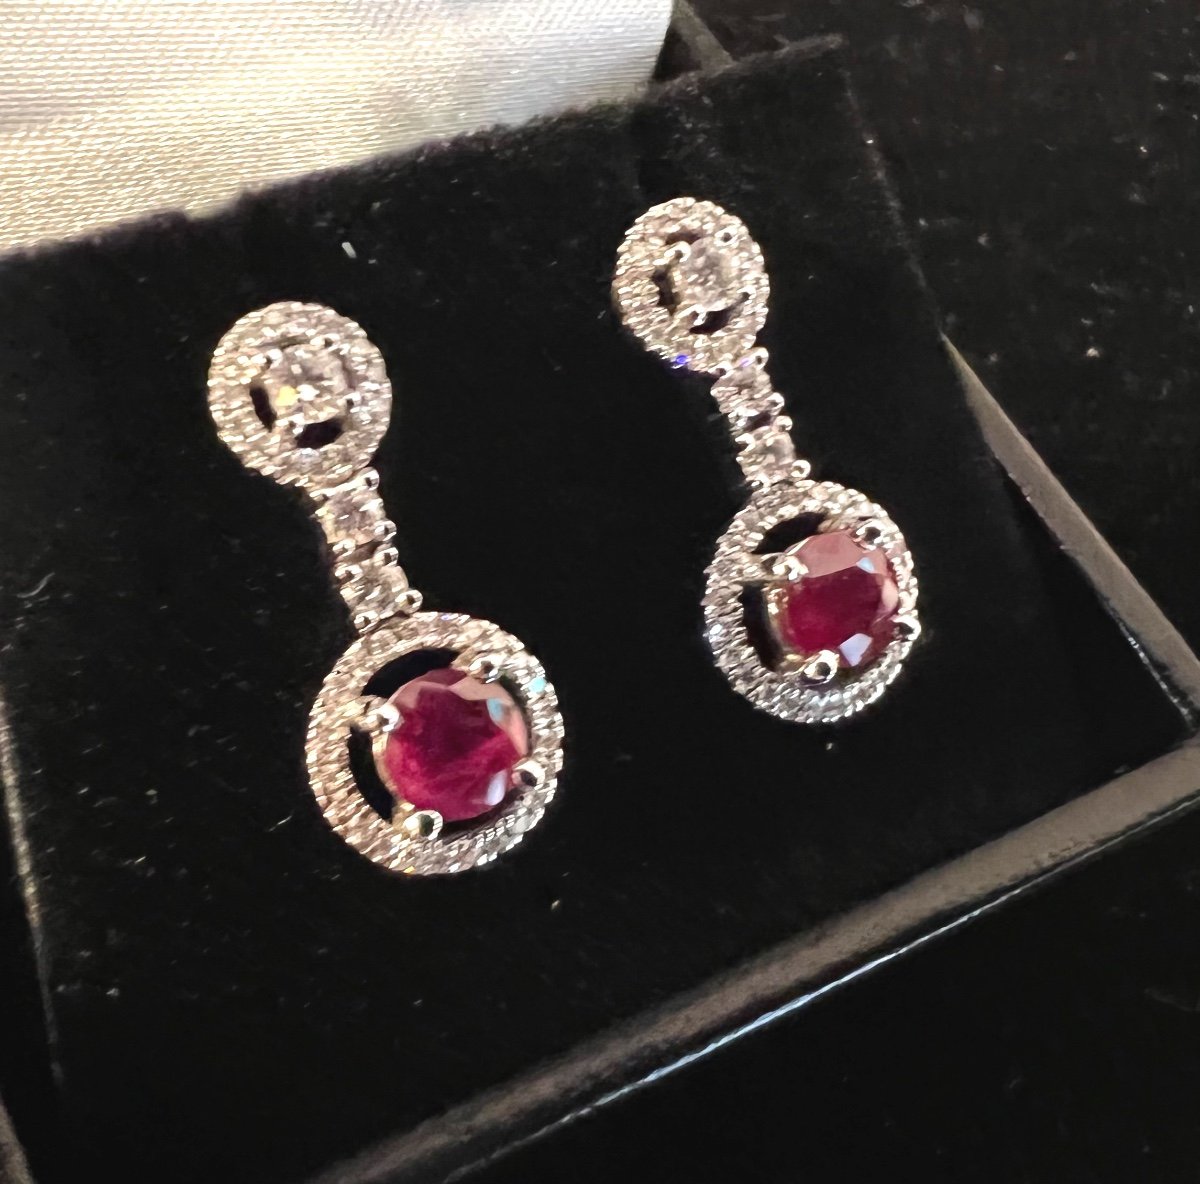 18ct White Gold Earrings Set With Rubies And Brilliants